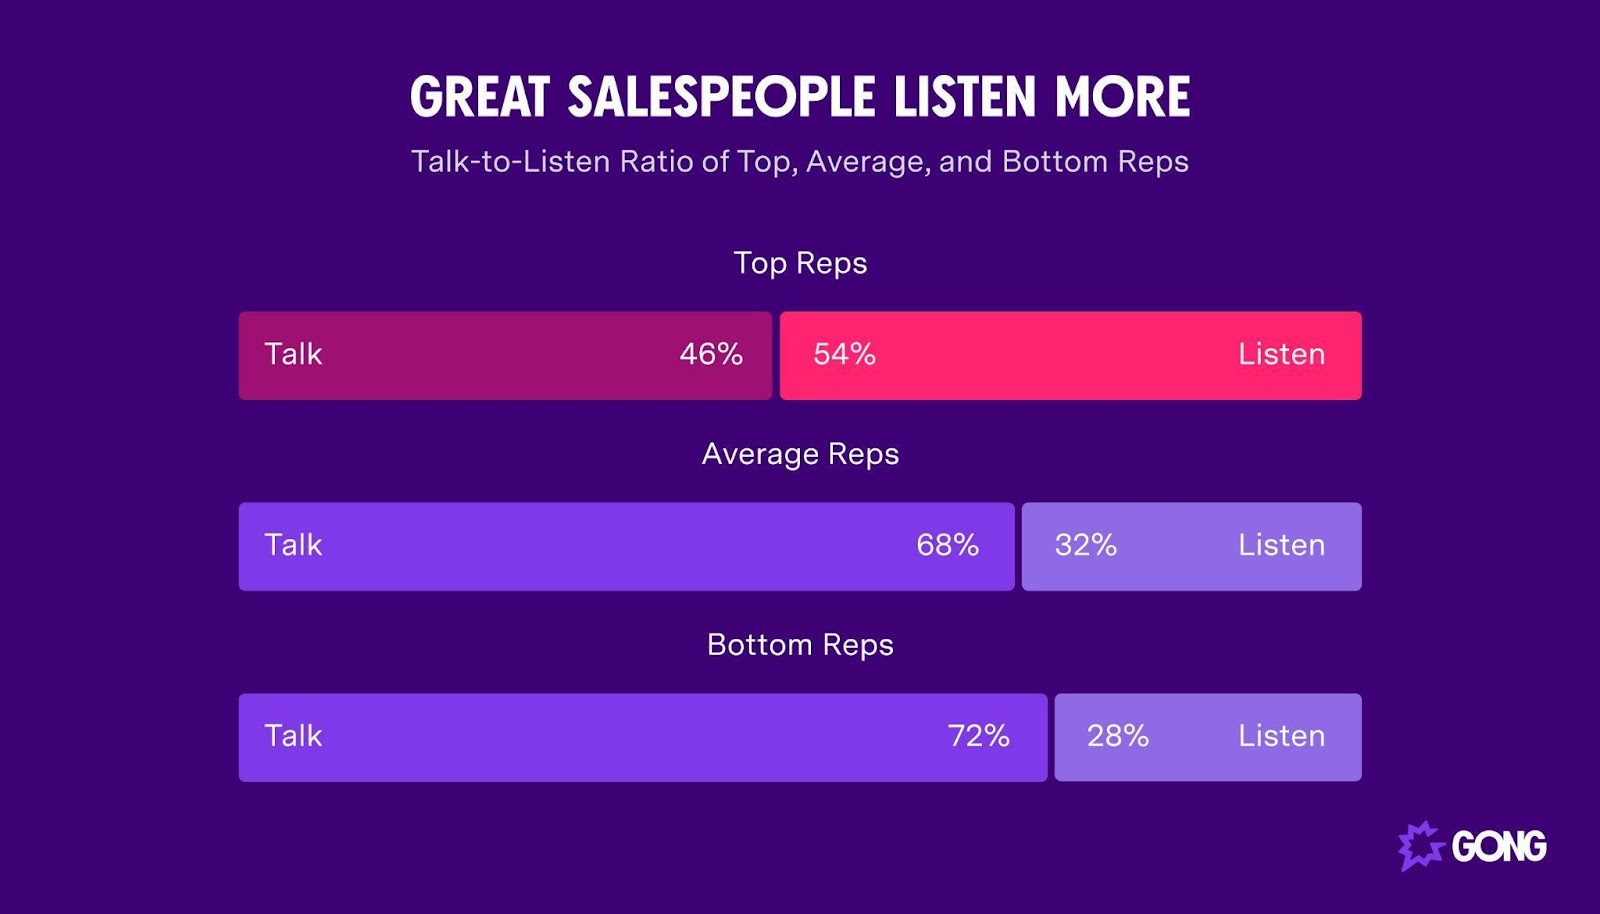 Bar chart shows that top-performing sales reps listen more than they talk, but lower-performing reps talk significantly more than they listen